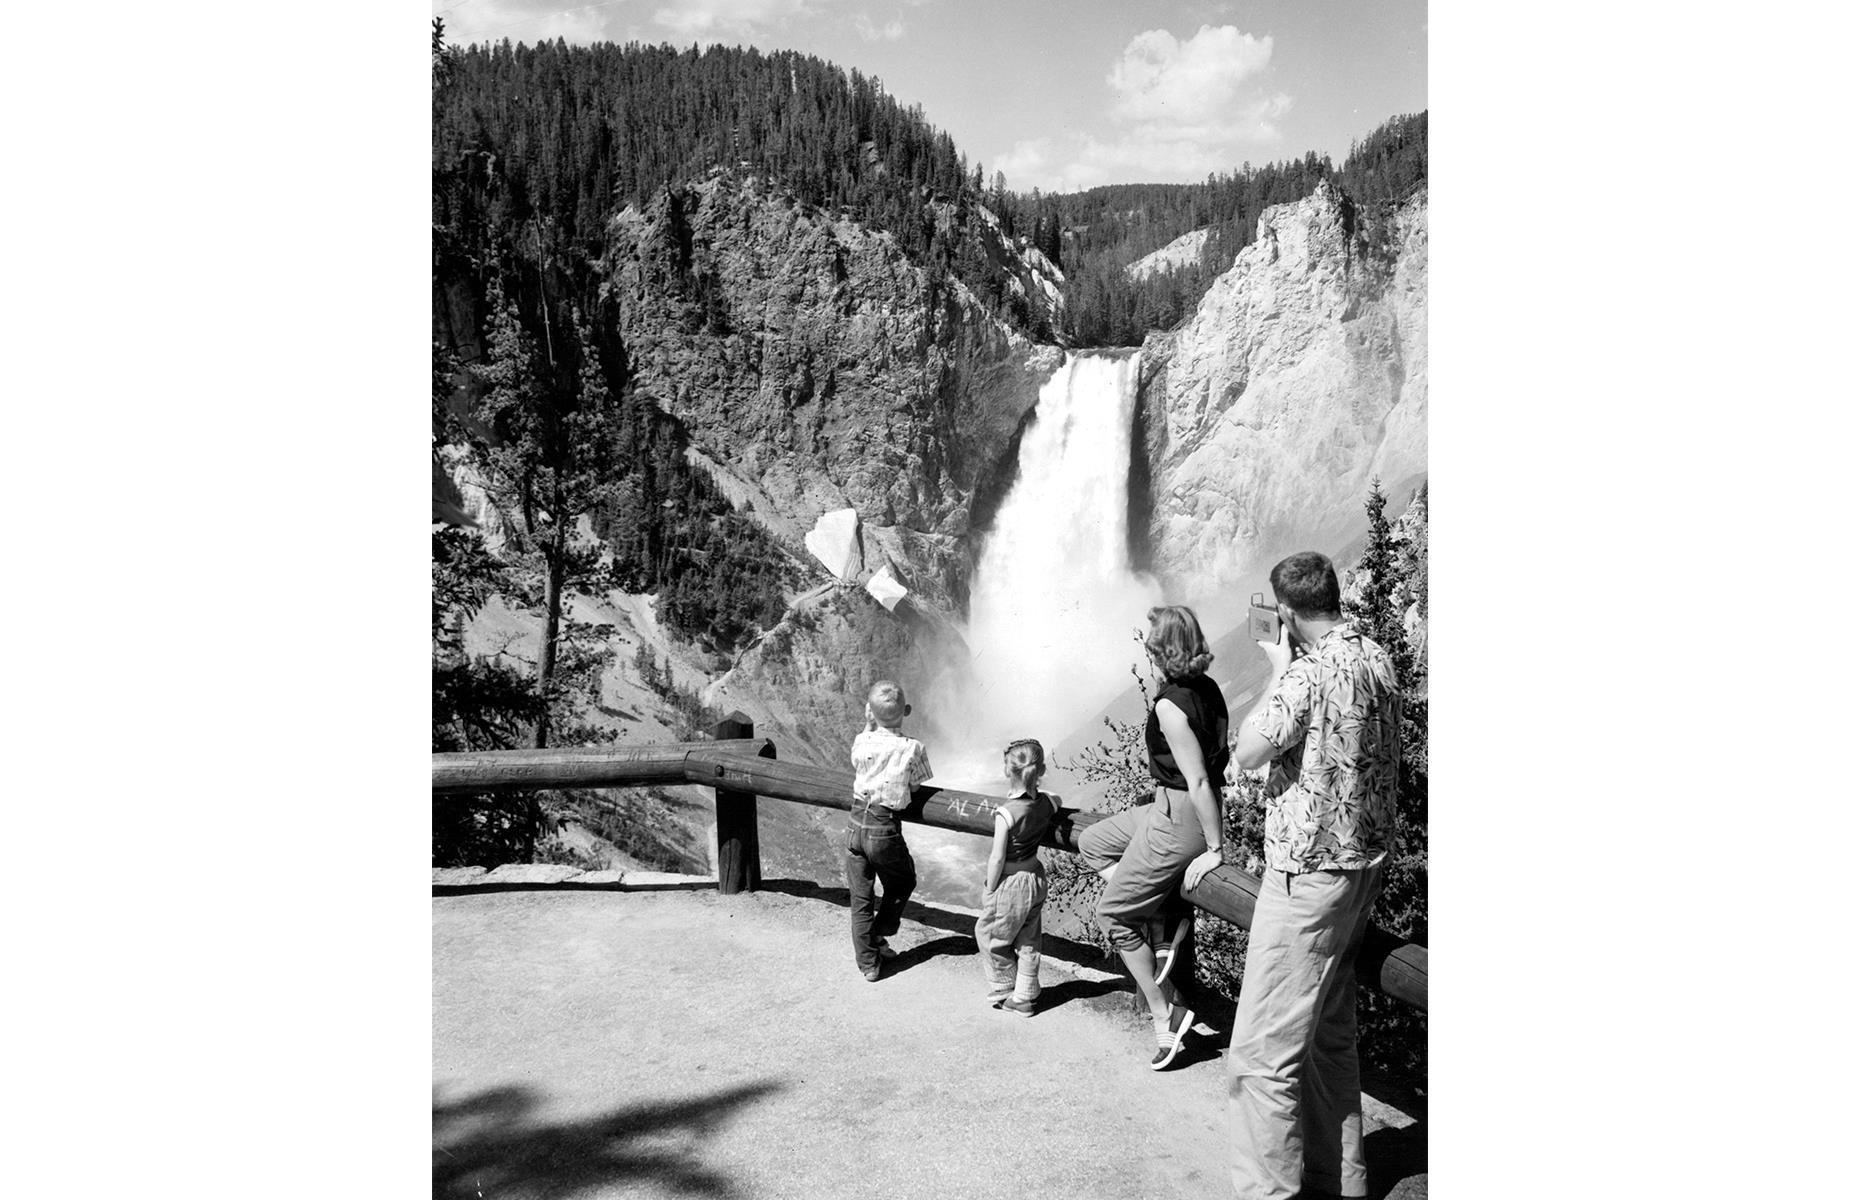 <p>Still, though, Yellowstone bounced back after the war and in 1948 visitor numbers hit the one million mark for the first time in history. This charming photograph was taken a few years later, in 1955. A young family gather at a viewpoint overlooking Tower Fall, a soaring cascade that plunges down for about 132 feet (40m). </p>  <p><a href="https://www.loveexploring.com/galleries/135655/surprising-us-national-park-facts-you-probably-didnt-know?page=1"><strong>Discover surprising US national park facts you probably didn't know</strong></a></p>